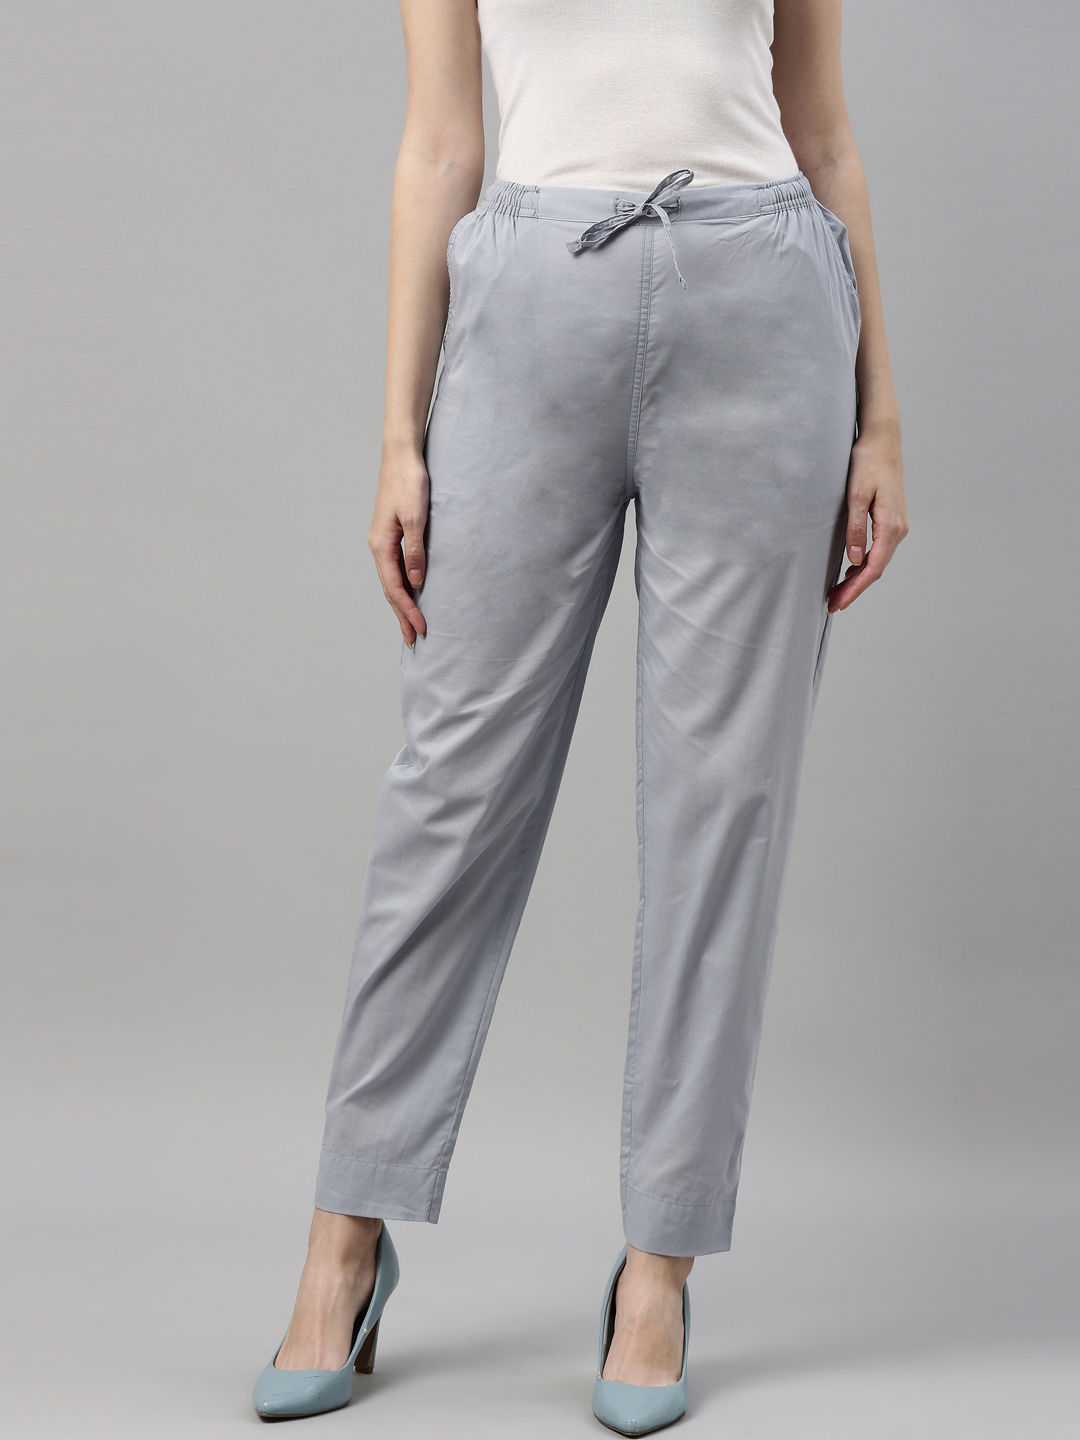 Solid Color Cotton Pant in Light Grey  BMX48